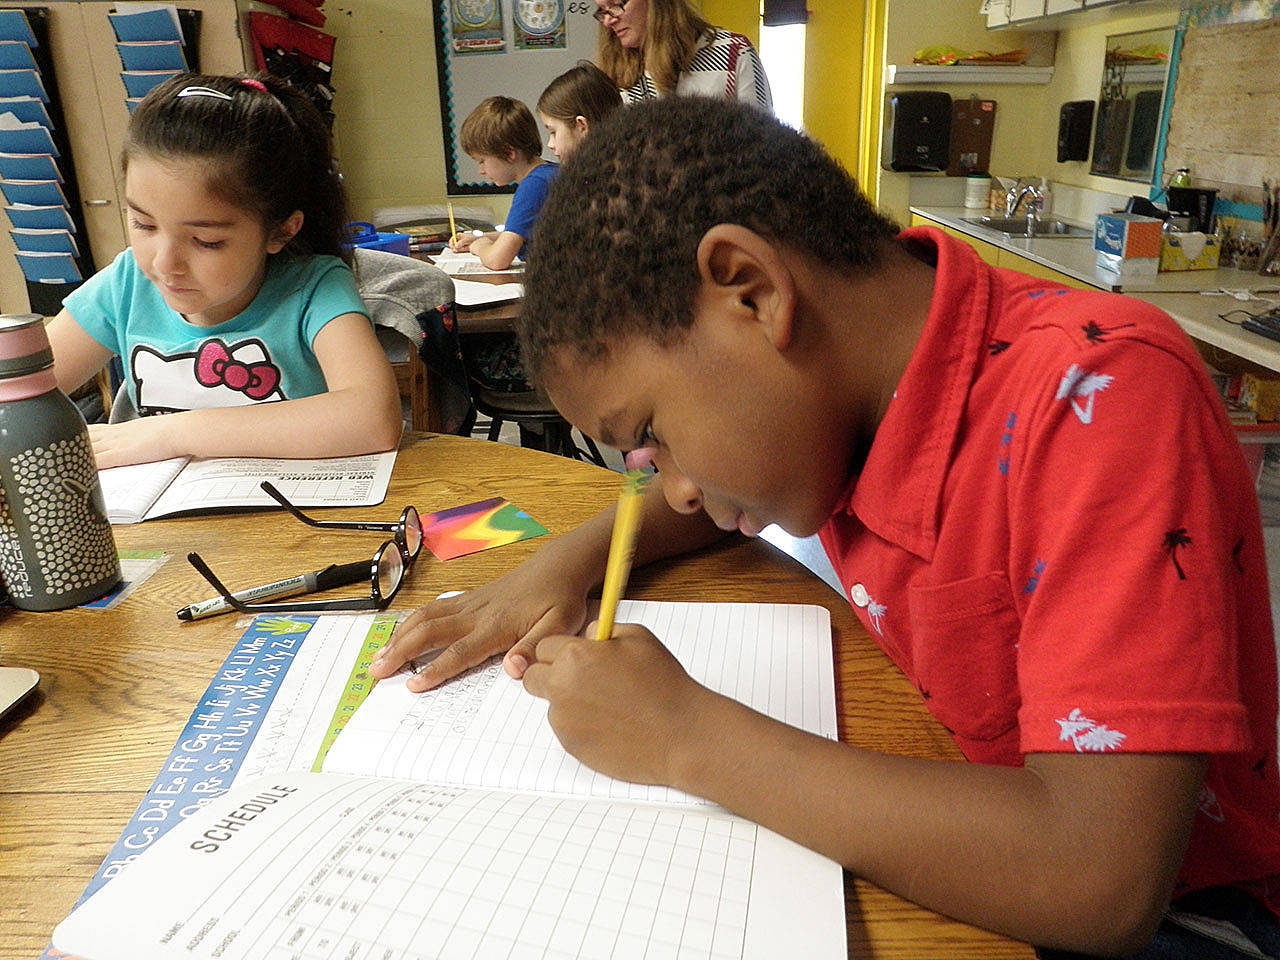 Second-graders Camren Williams, right, and Michelle Marquez get to work on their writing task.